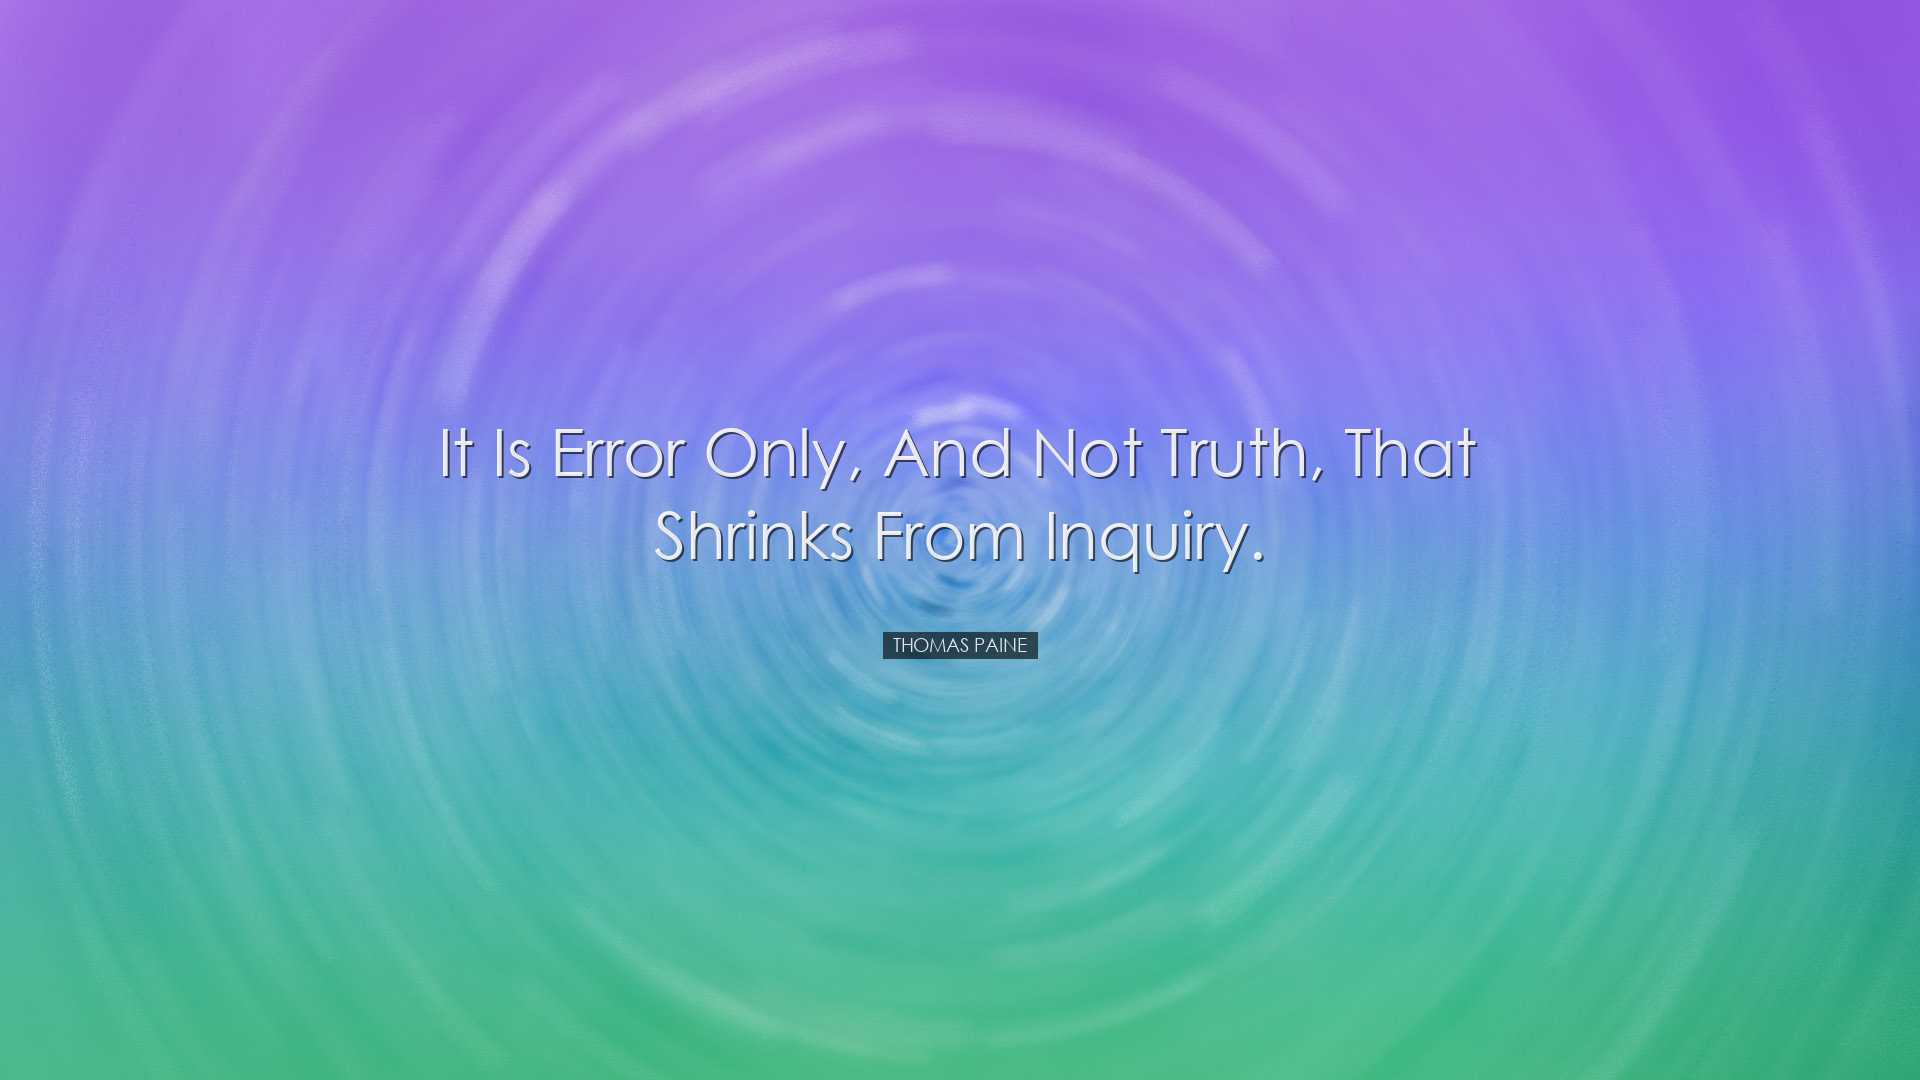 It is error only, and not truth, that shrinks from inquiry. - Thom